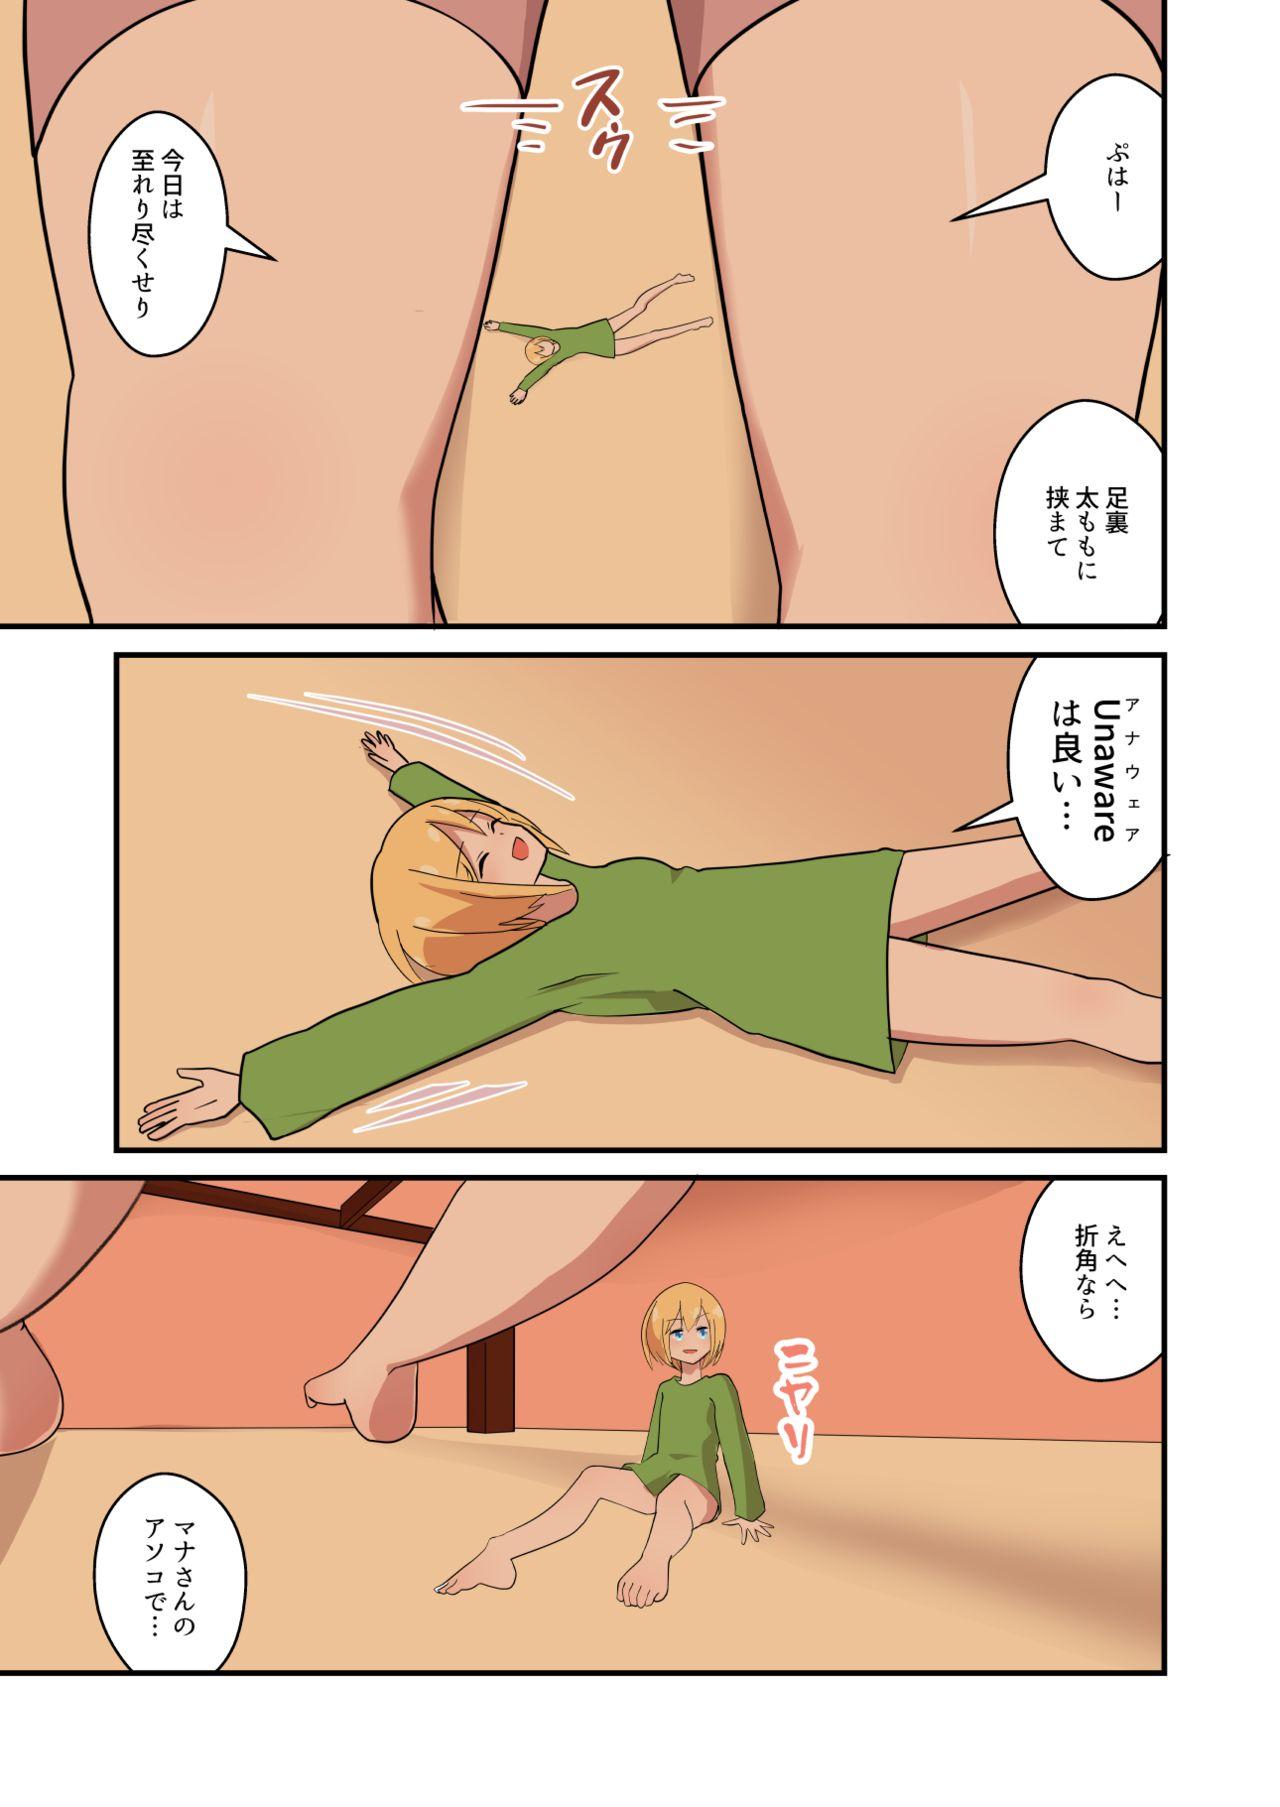 Mama Mana Only Knows - 2021年01月分 Stepdad - Page 9